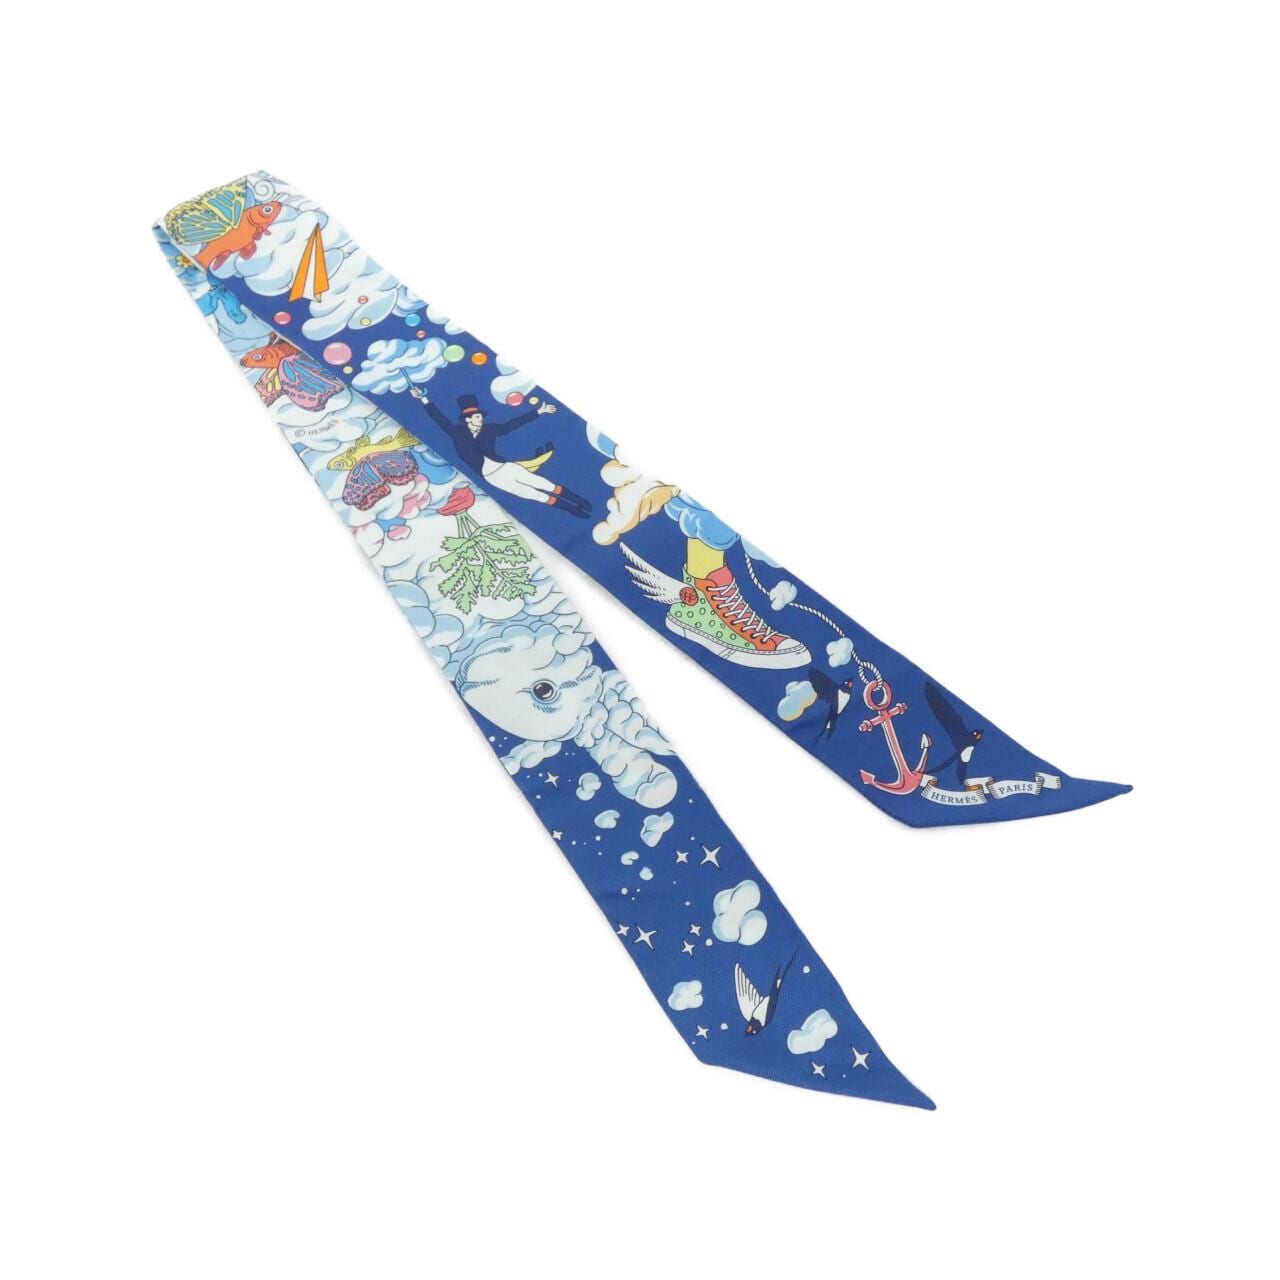 HERMES SOR MON NUAGE Twilly 063900S Scarf